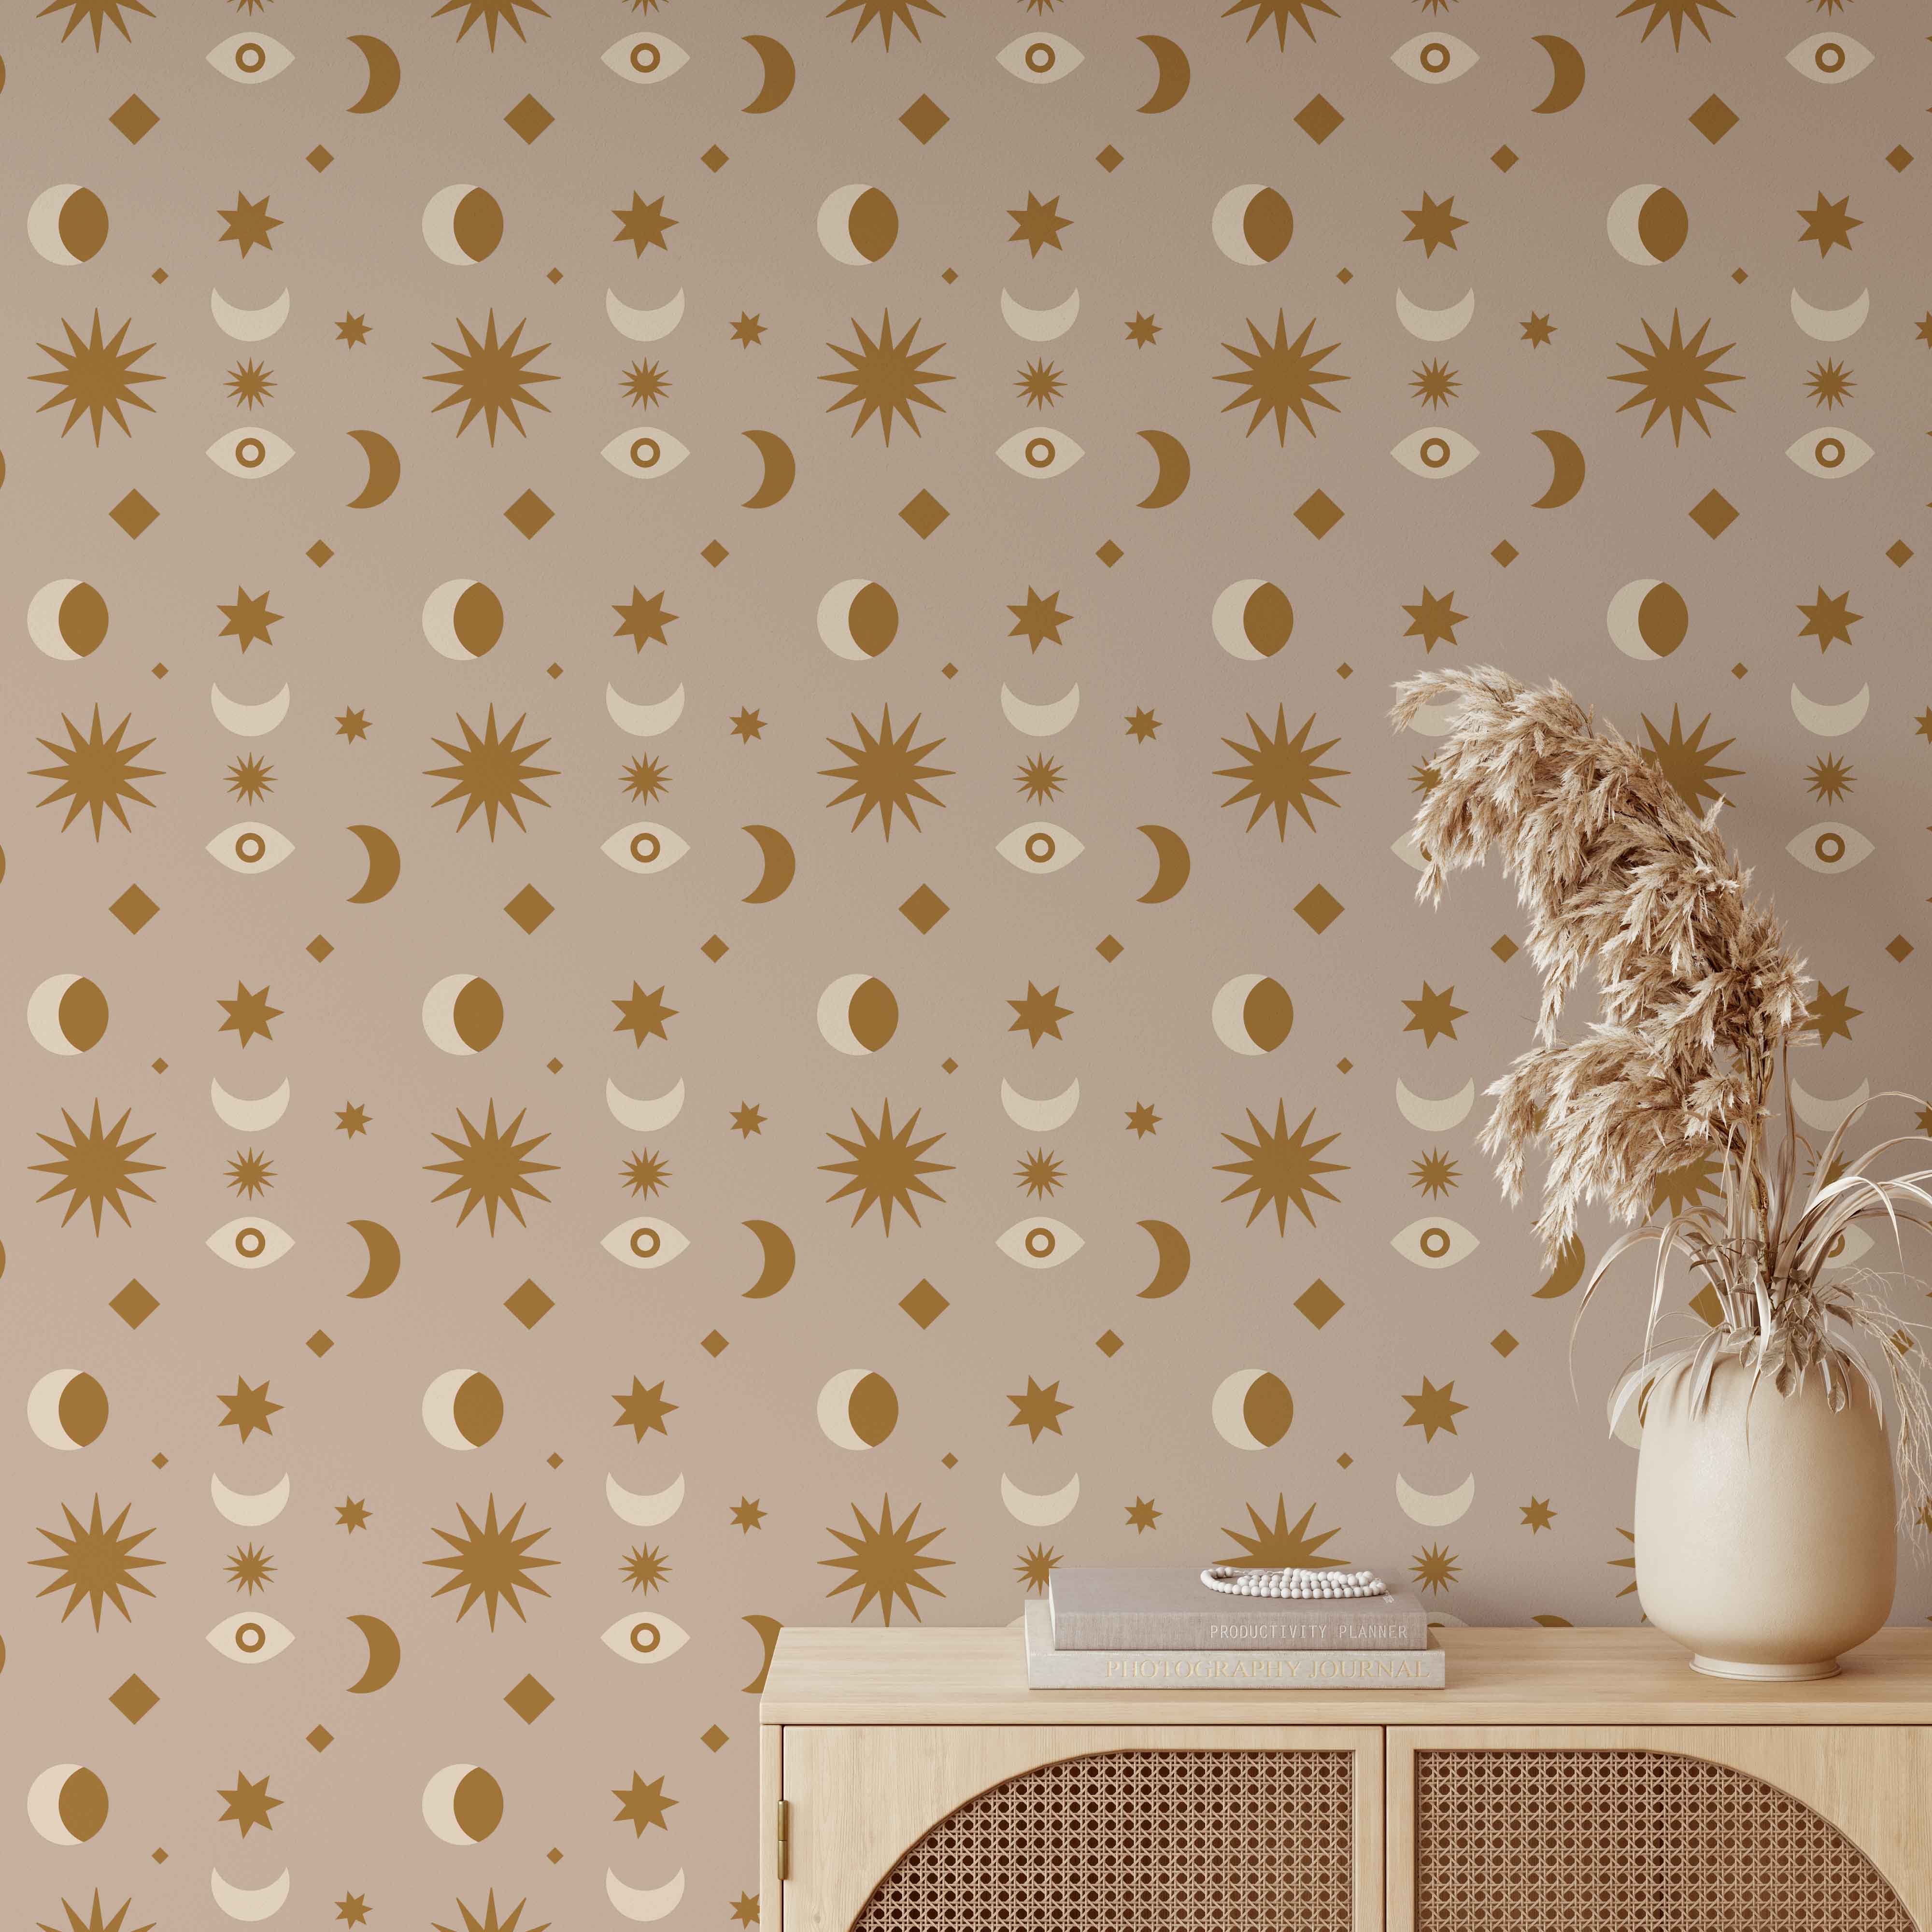 Celestial Peel  Stick Fabric Removable Wallpaper  Designed  Made in the  USA  Ideal Place Market